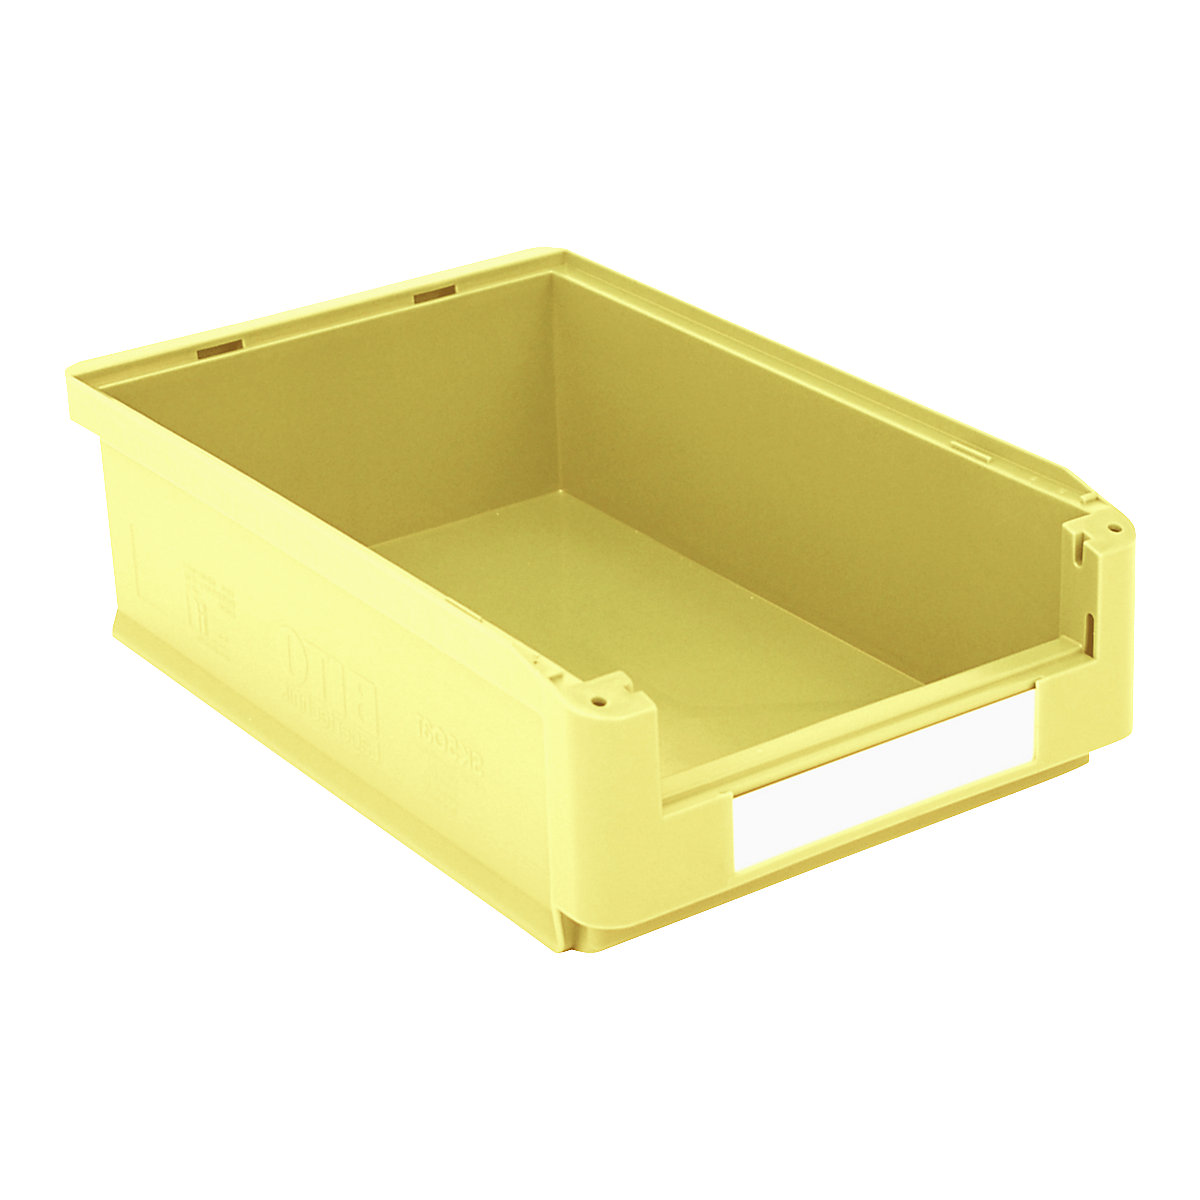 Open fronted storage bin – BITO, LxWxH 500 x 313 x 145 mm, pack of 8, yellow-2